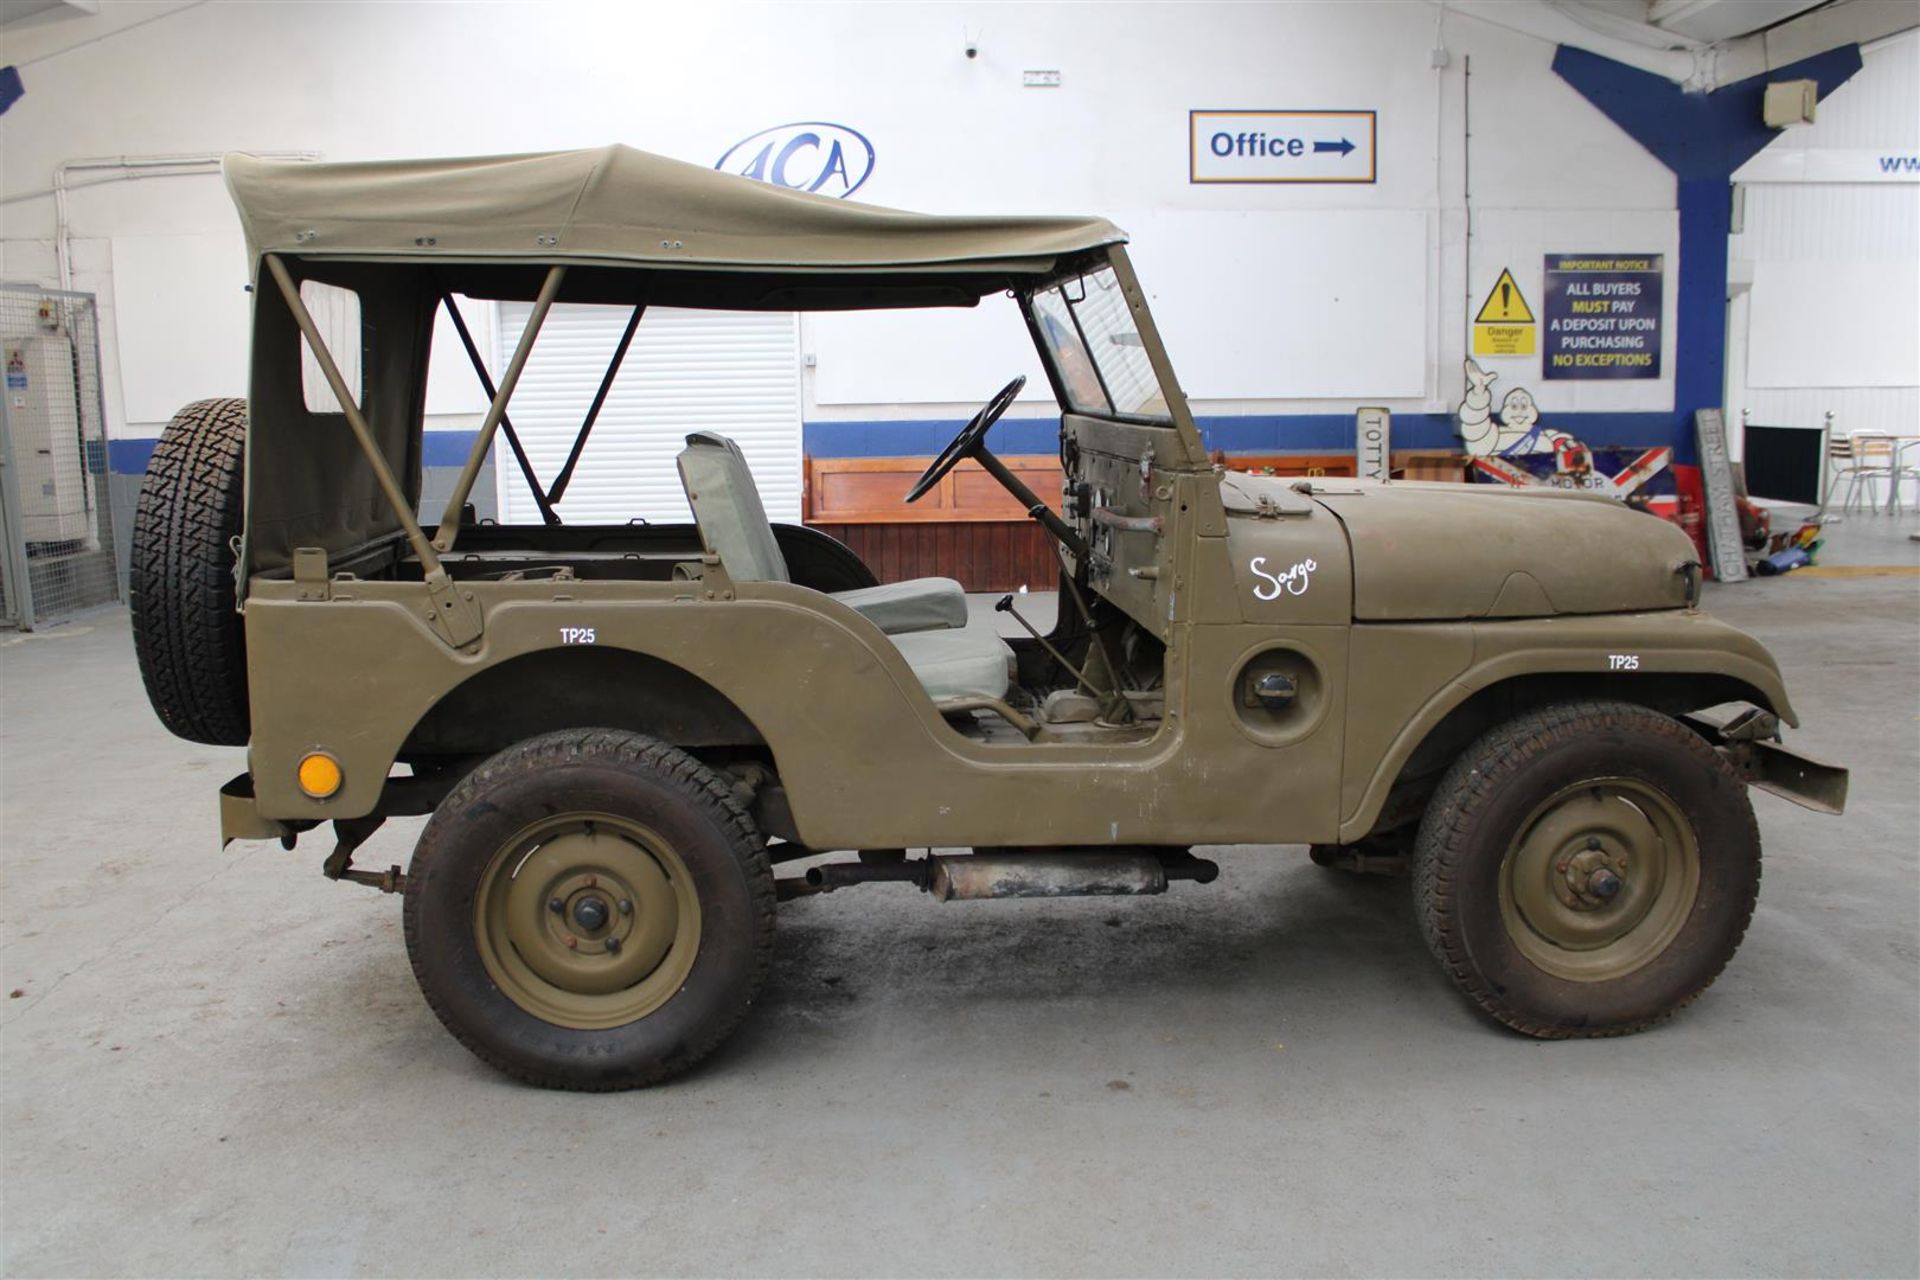 1961 Willys Jeep LHD - Image 8 of 23